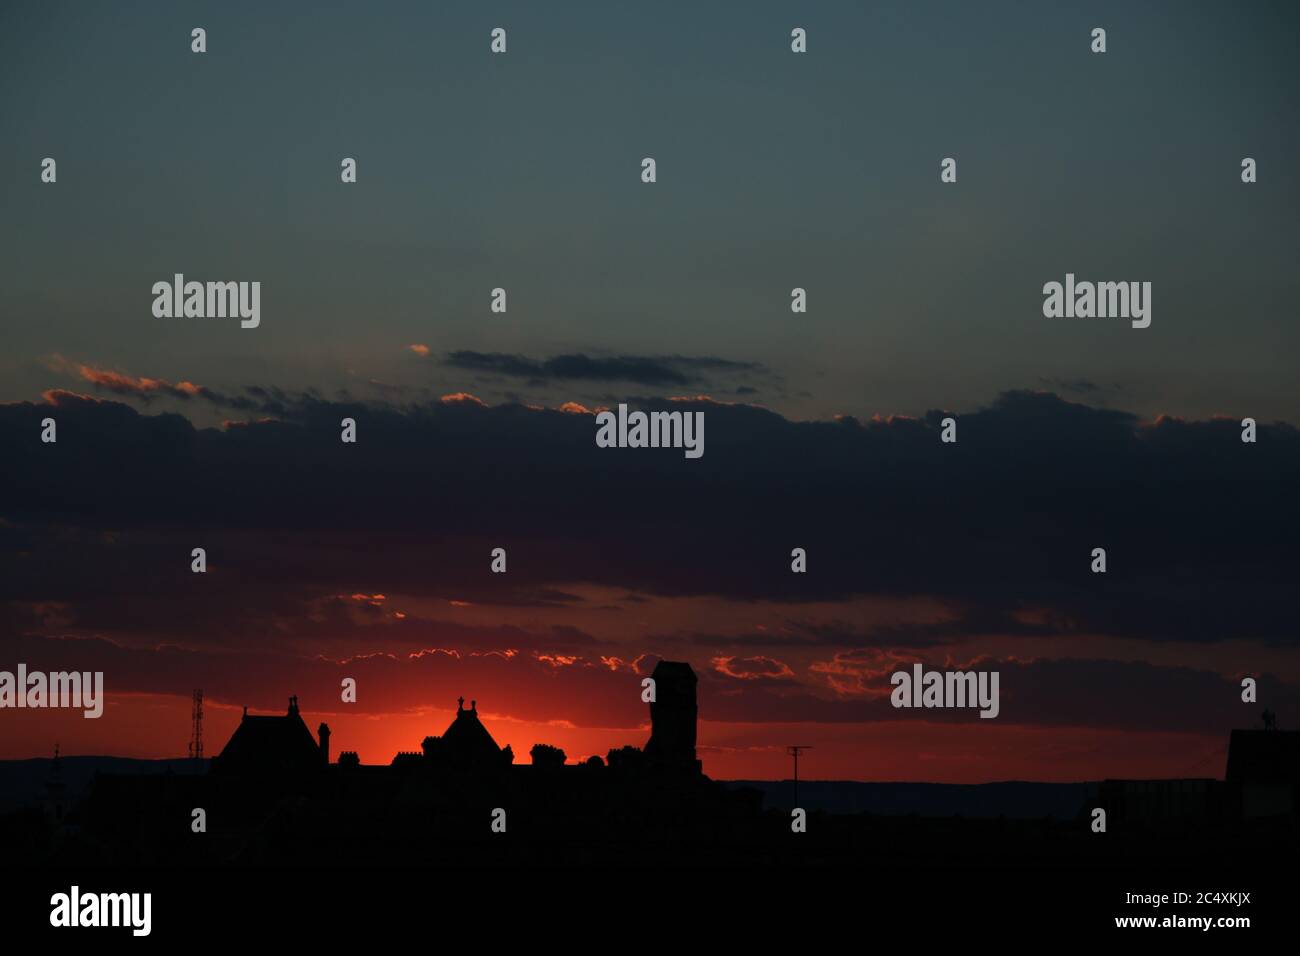 Concept of calm and serenity. Colorful and cloudy sunset in the background. Sibiu, Romania, old medieval town in eastern central Europe. Fiery red sun Stock Photo